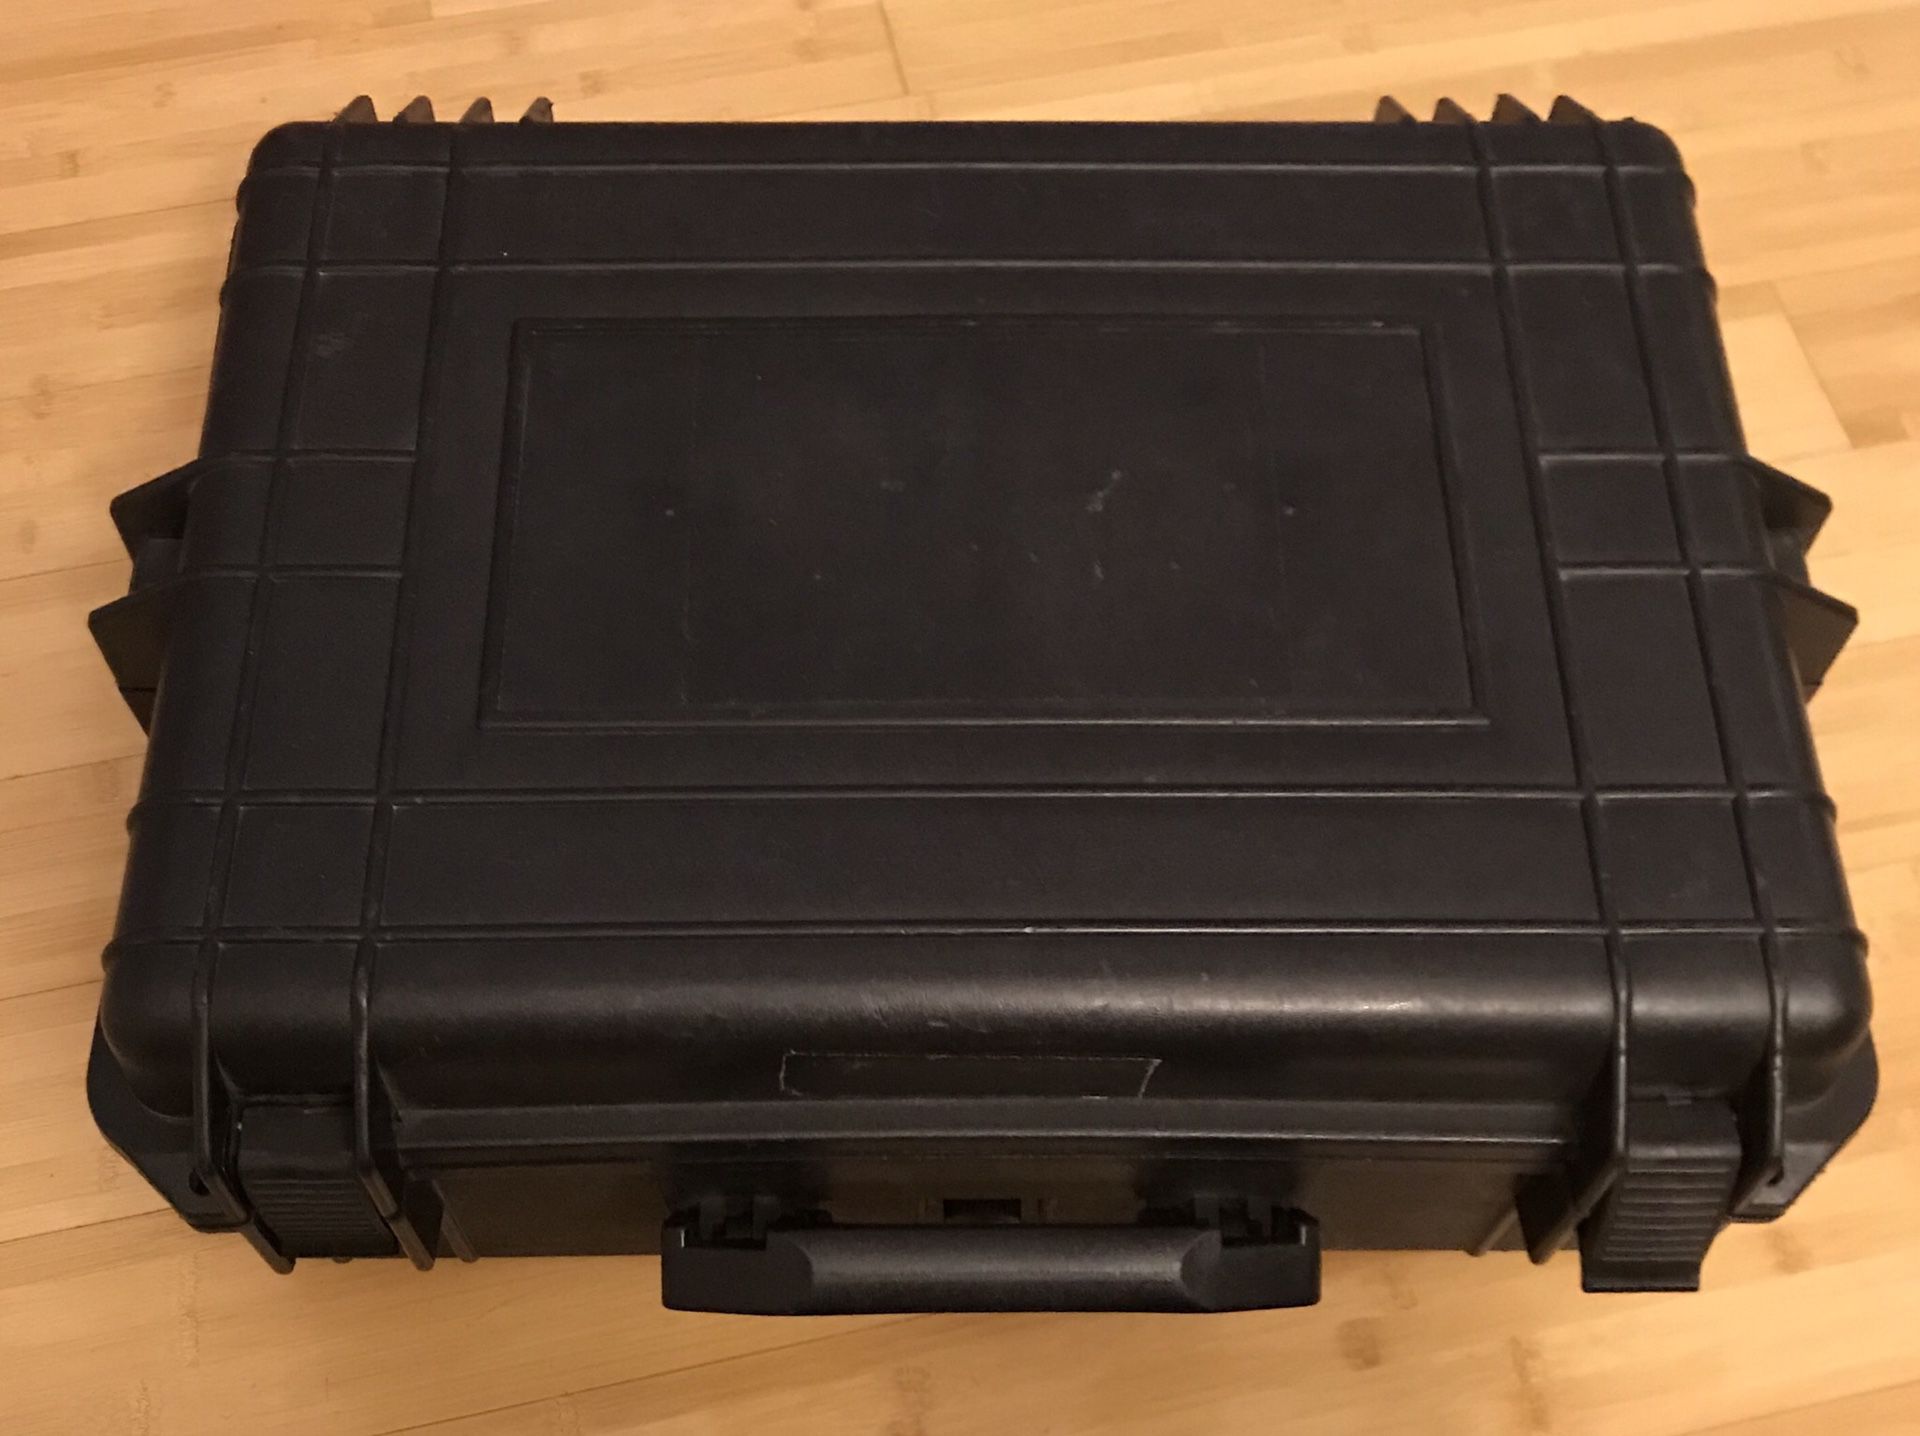 2 Hard Cases for Video or Audio Equipment